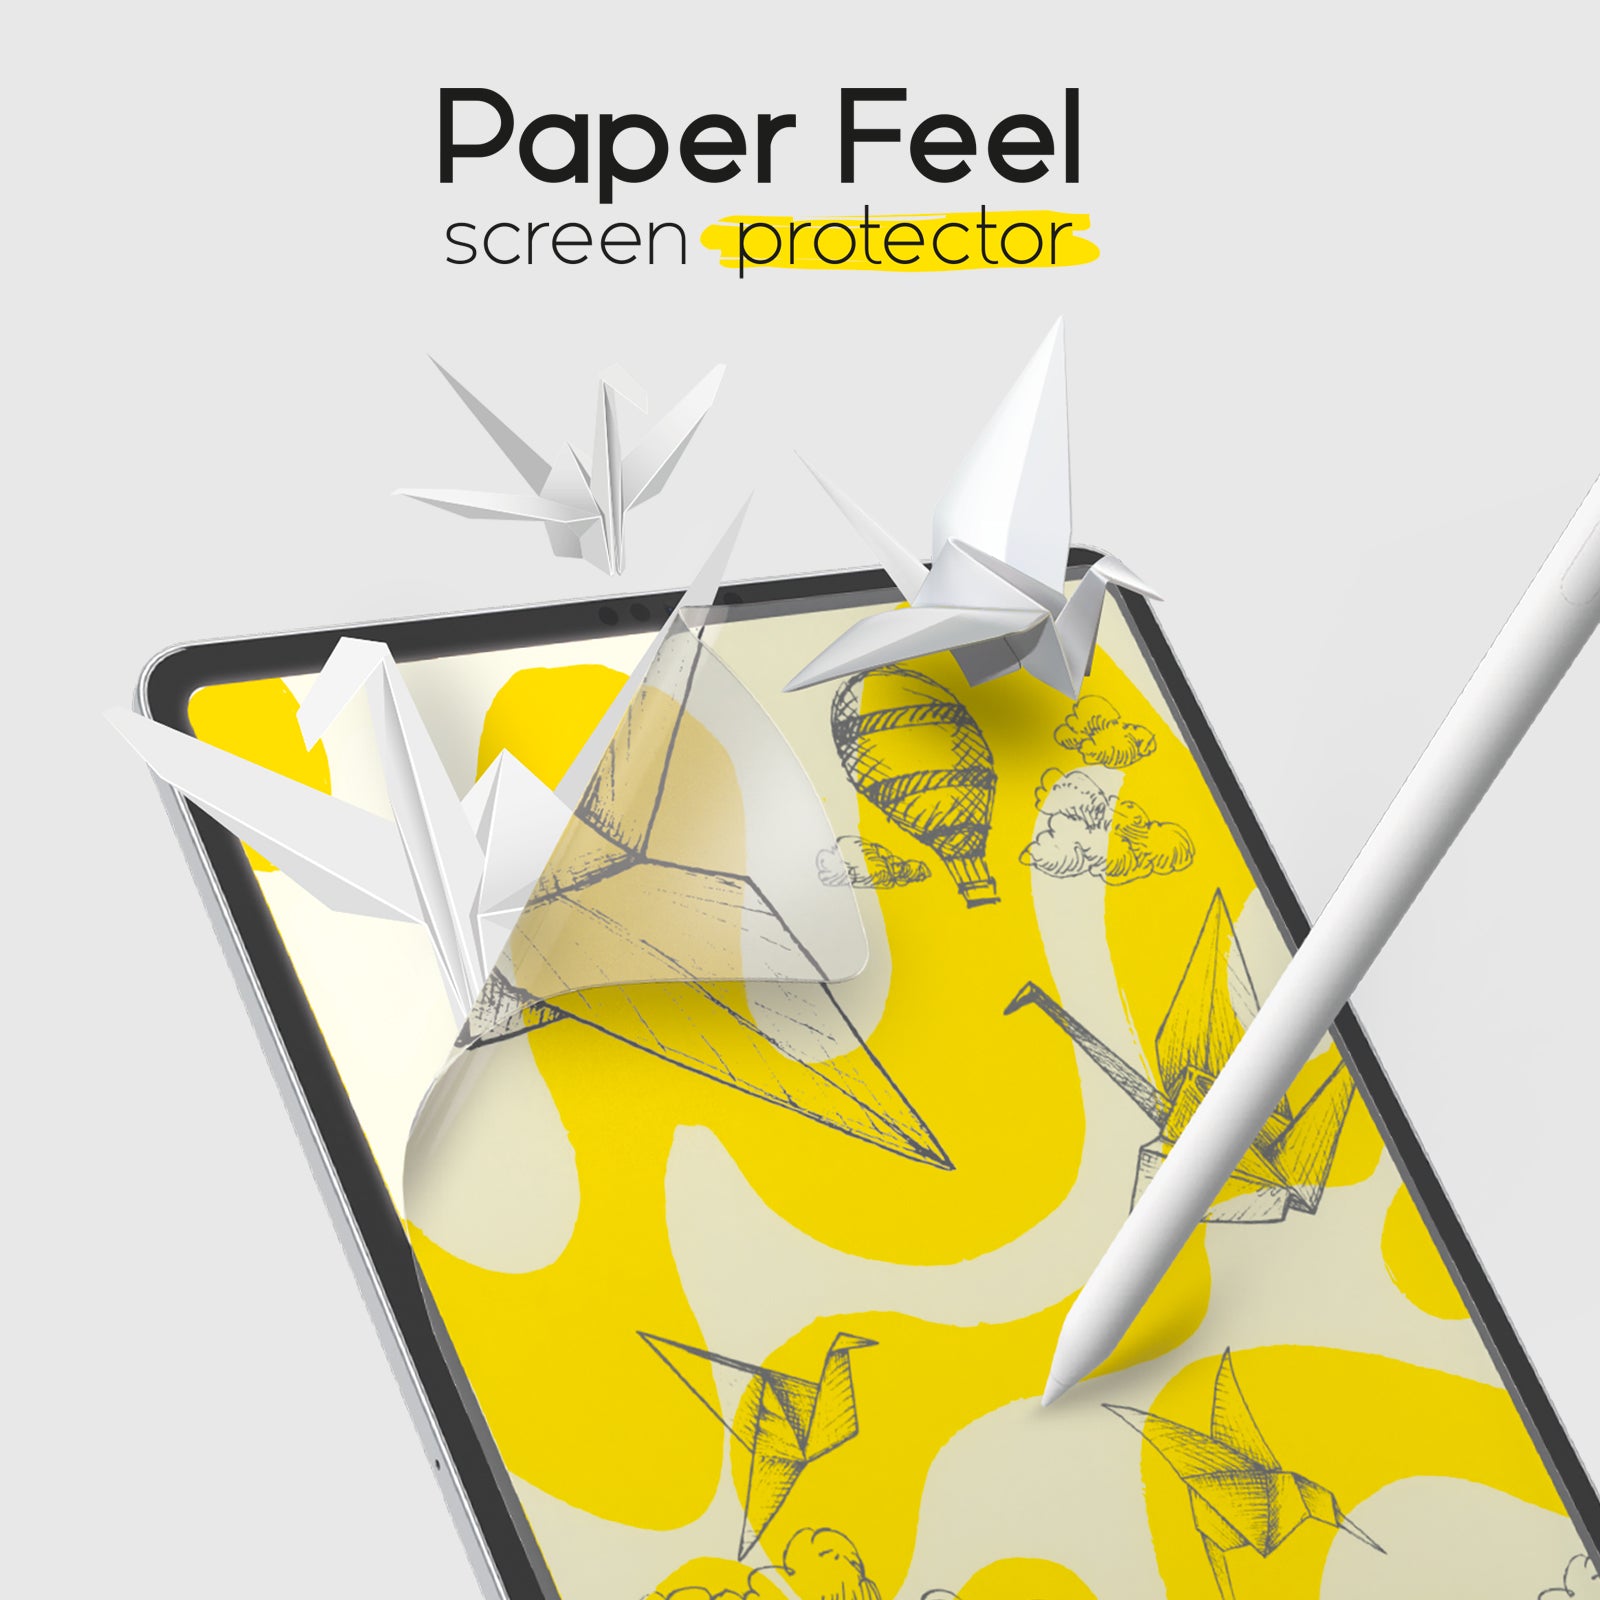 Applying PaperLike artist's screen protector on the new iPad Pro and its  effects on the drawing experience